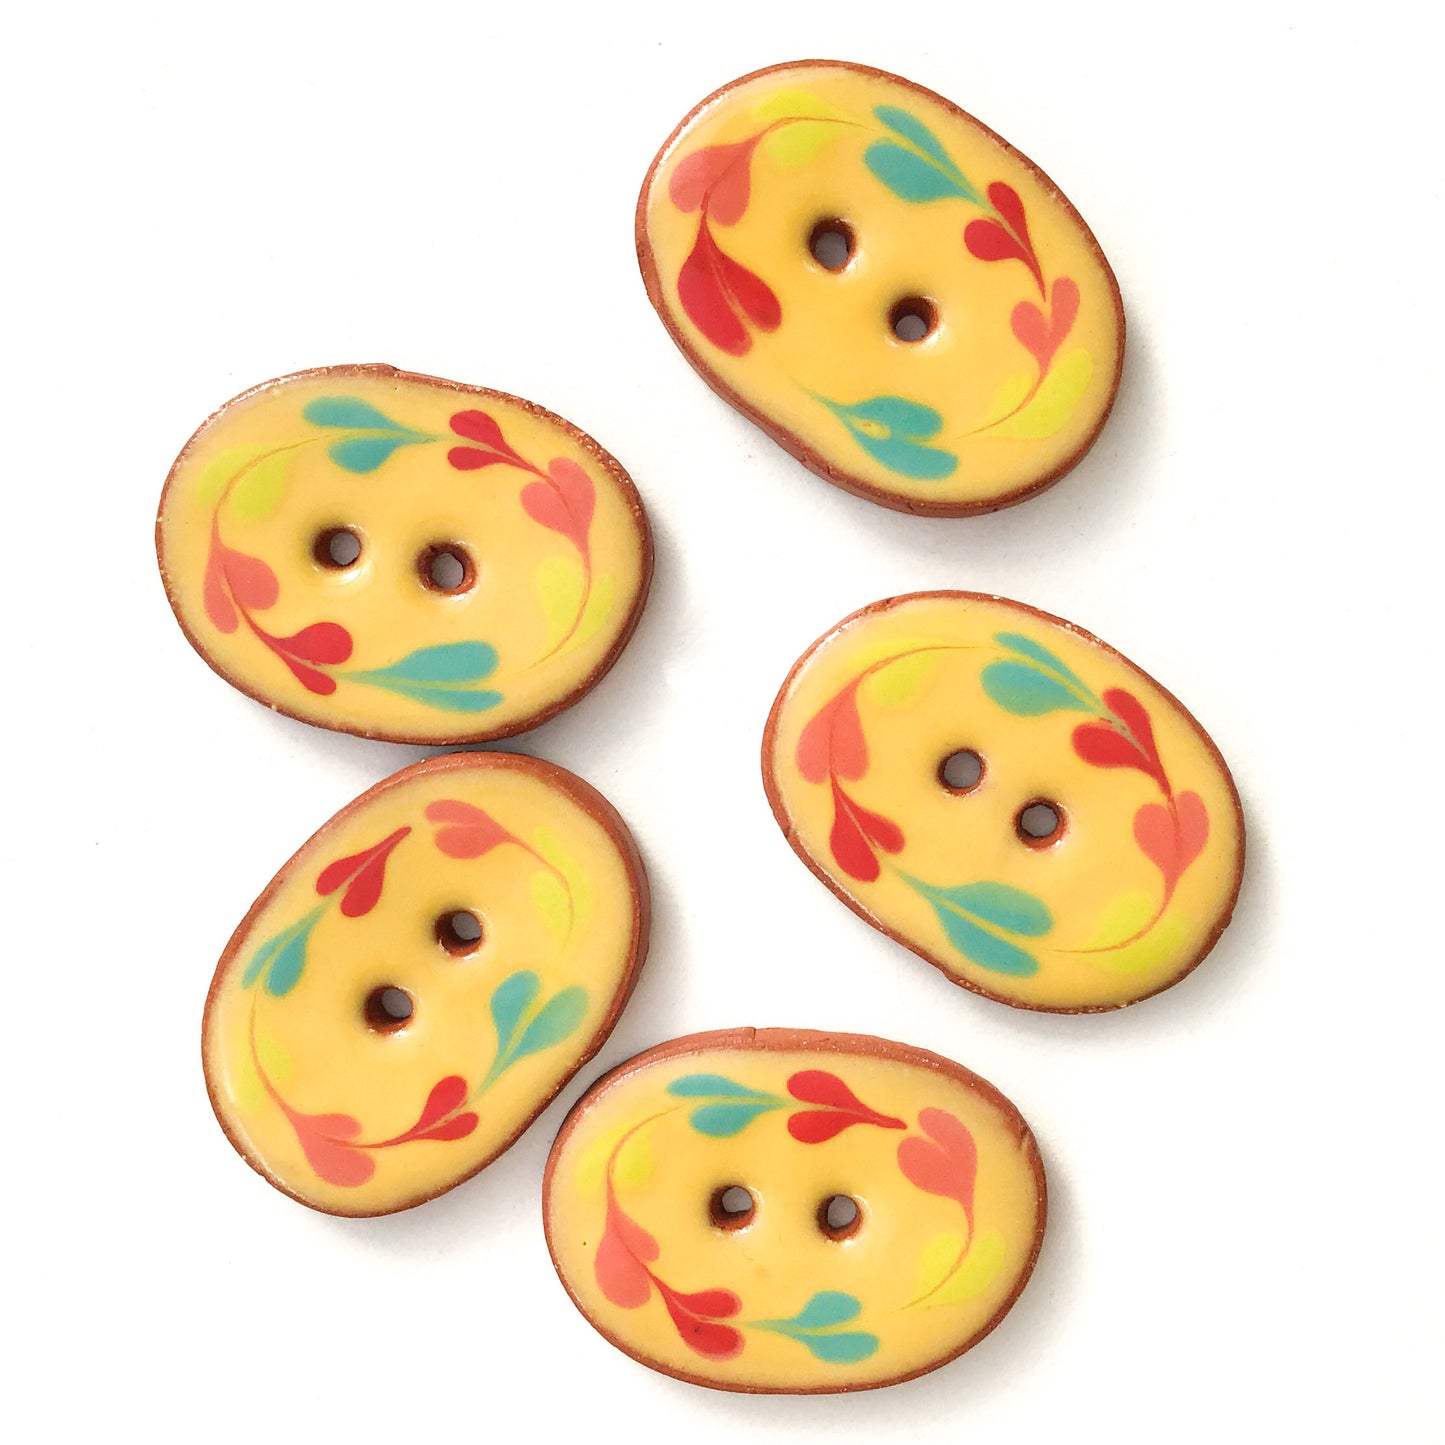 Yellow Ceramic Buttons with Rainbow Wreath - Oval Clay Buttons - 7/8" x 1 1/4"